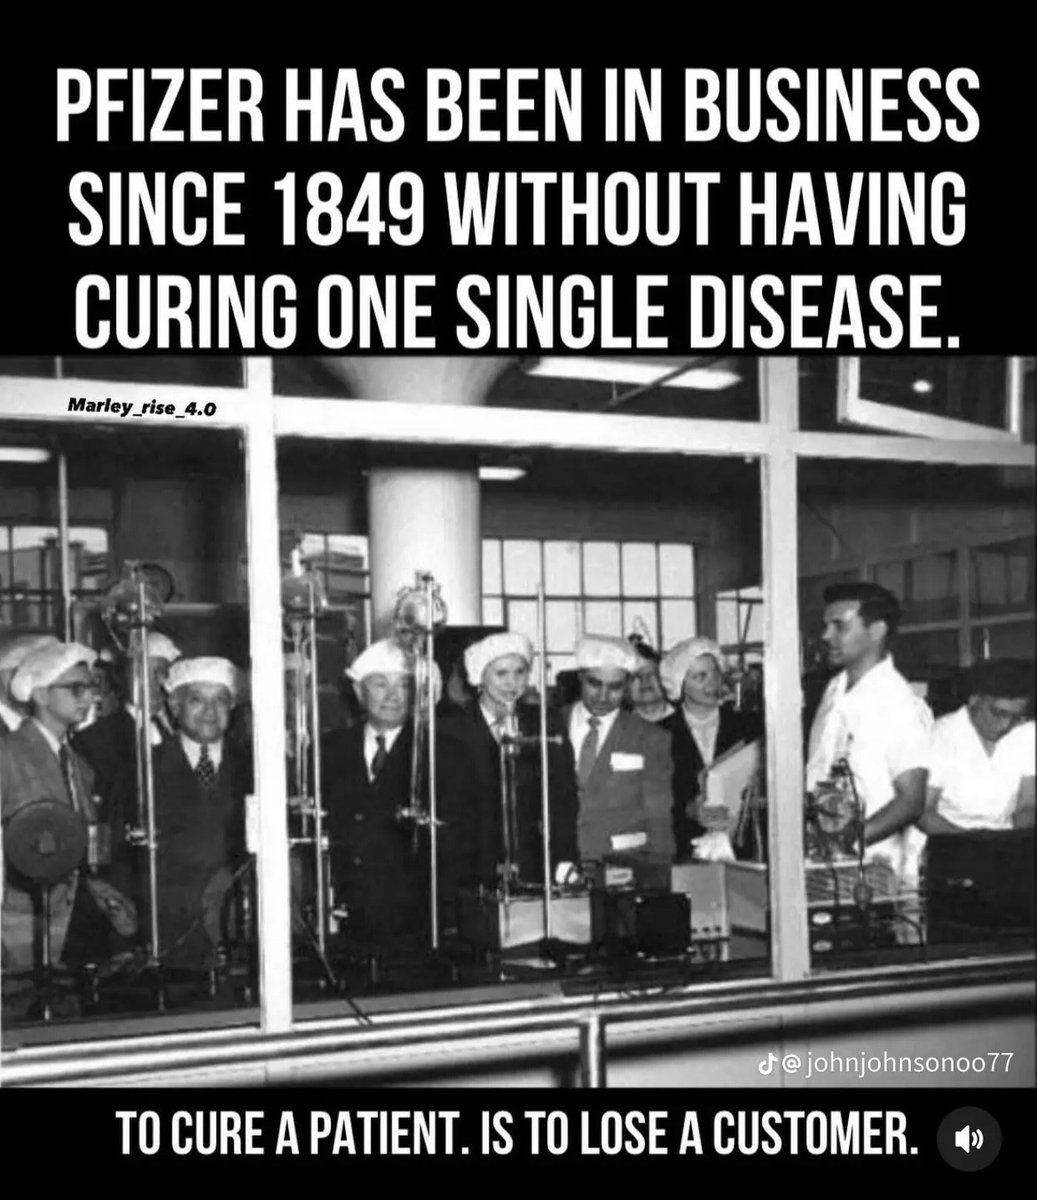 Big Pharma is not your friend. 
 Charles Pfizer & Company was founded in Brooklyn in 1849 by cousins Charles Pfizer and Charles Erhart, whose first product was an antiparasitic called santonin that treated intestinal worms. They achieved early success by developing citric acid.…